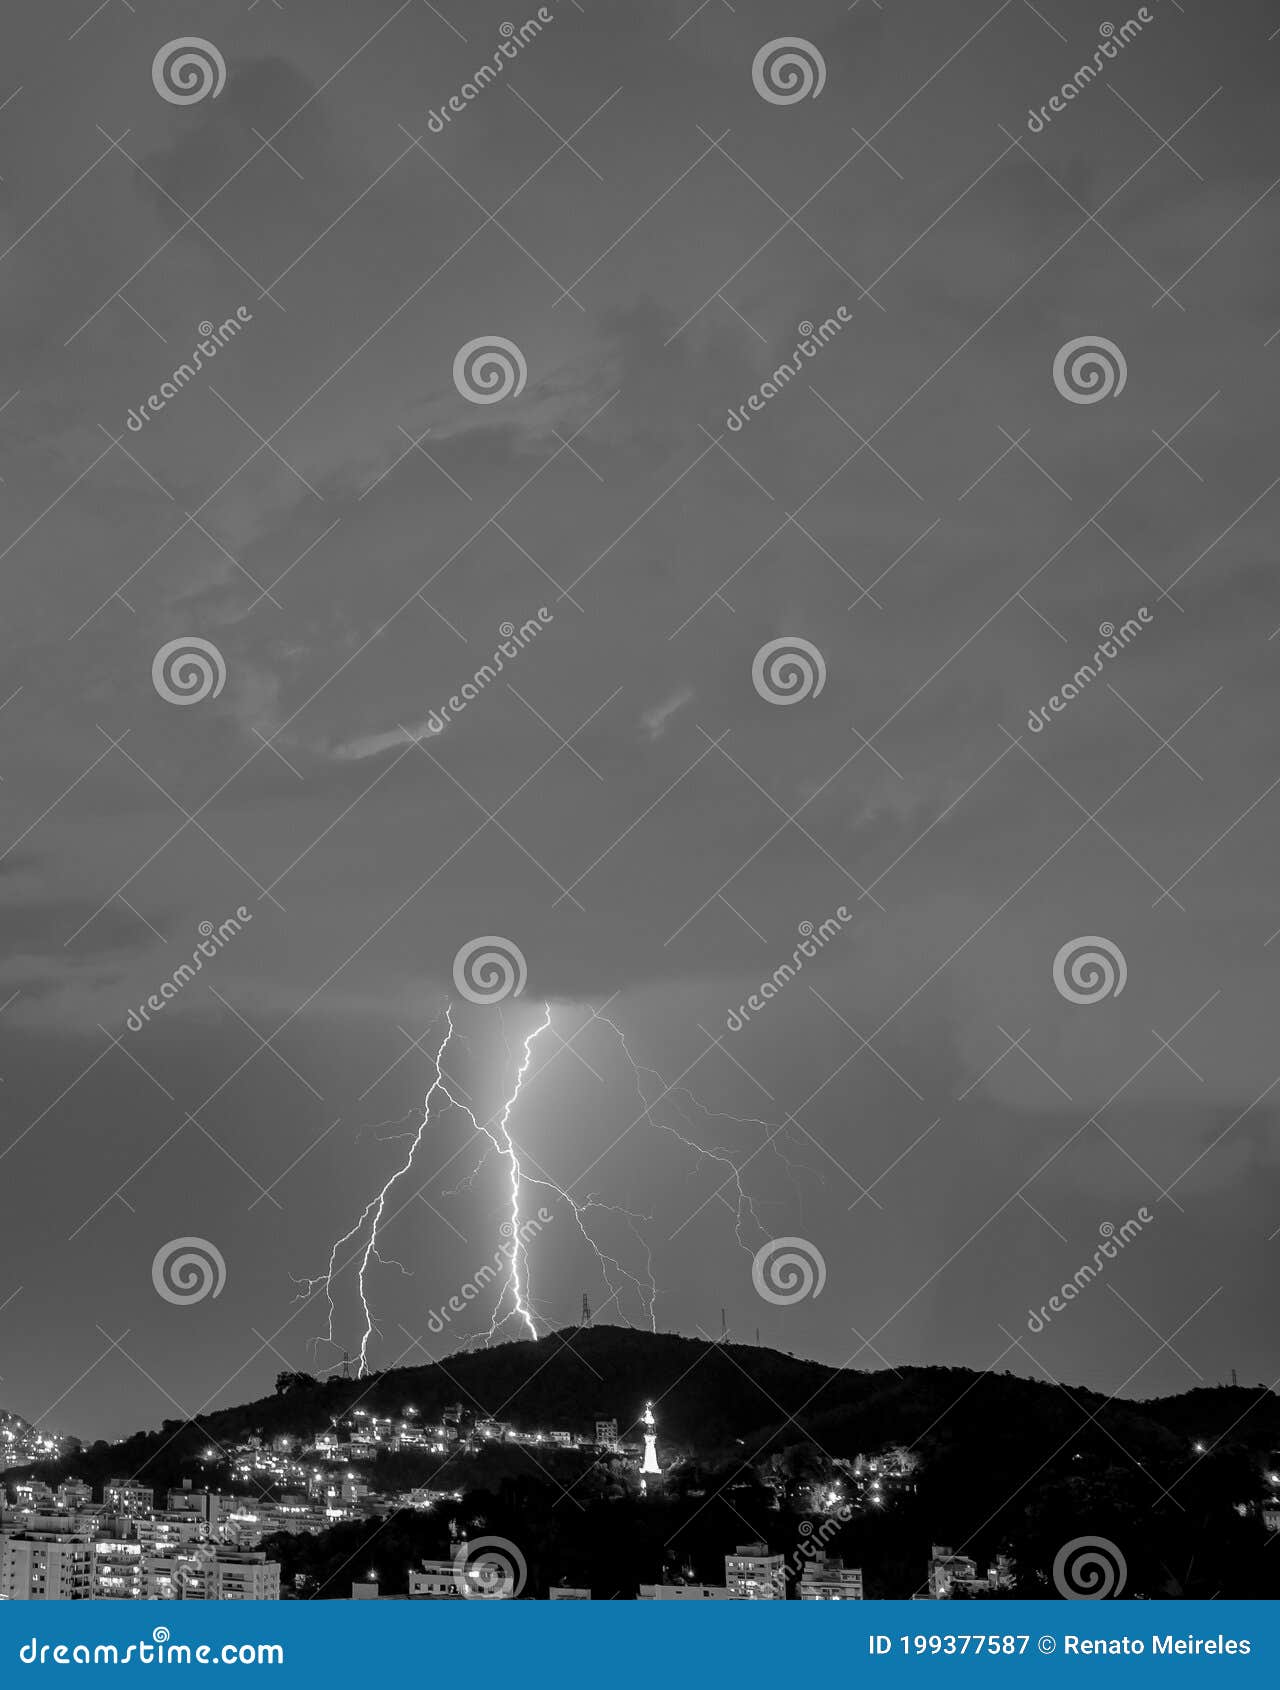 images of the arrival of a strong summer storm with lightning and rain. event in the city in the late afternoon, early evening in